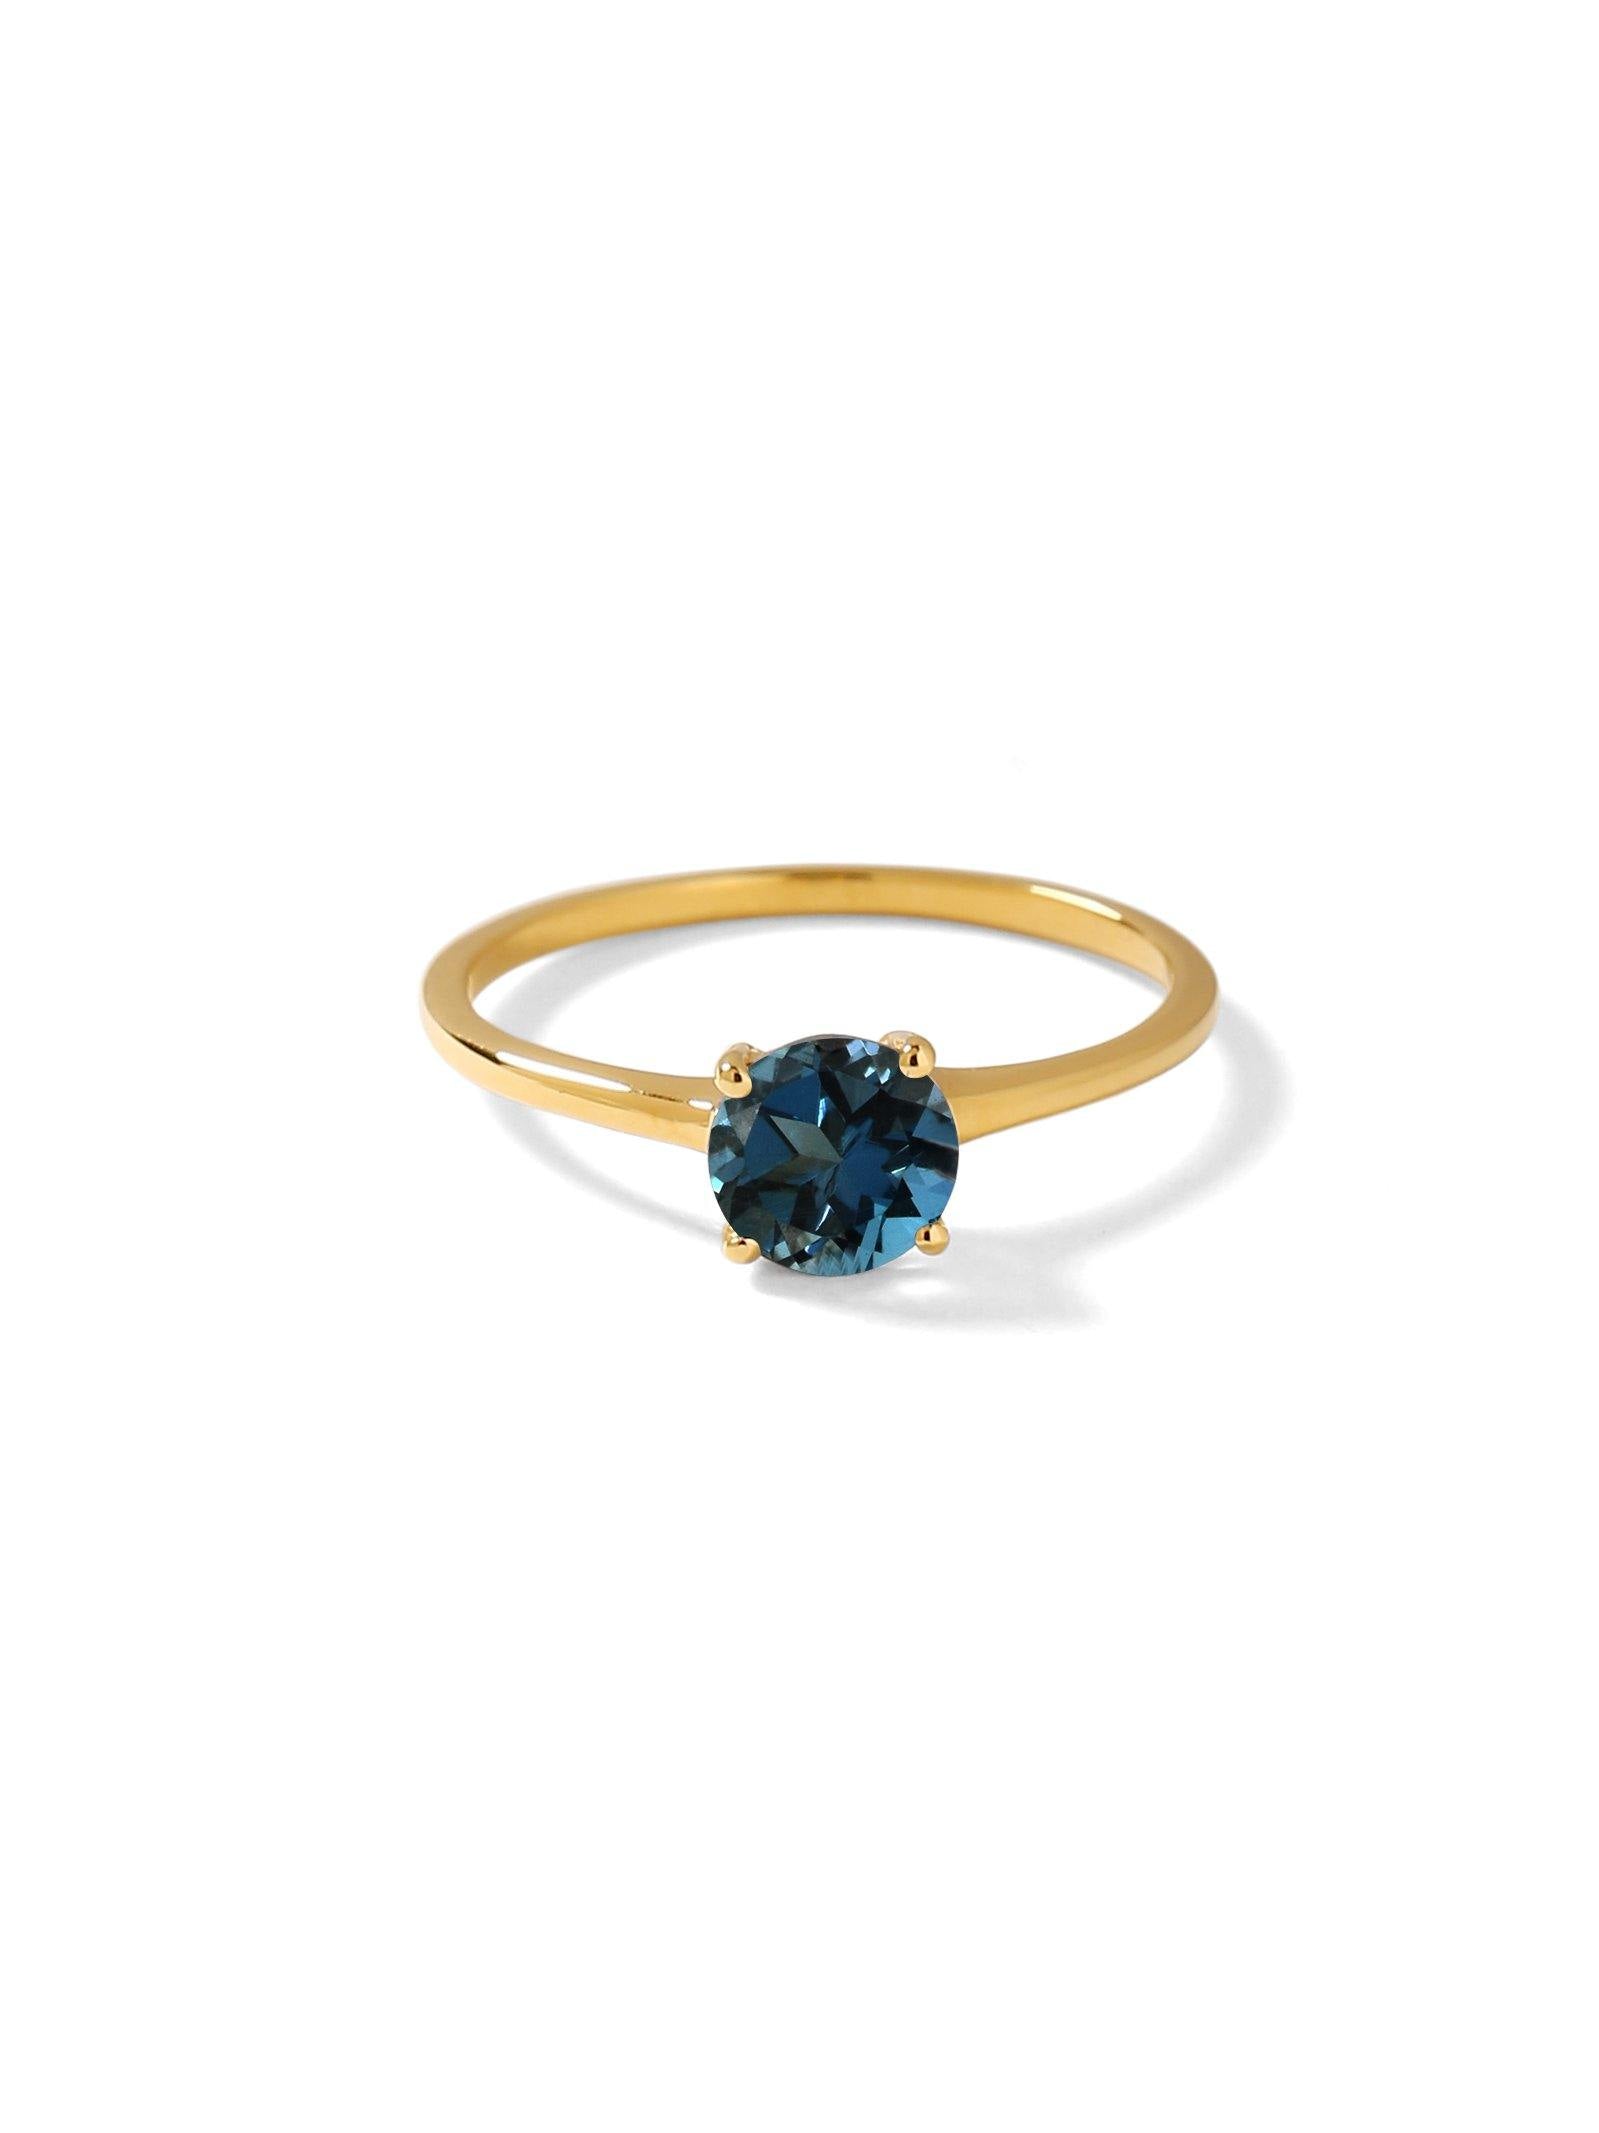 0.96 Ct London Blue Topaz Solid 10k Yellow Gold Solitaire Ring Jewelry - YoTreasure